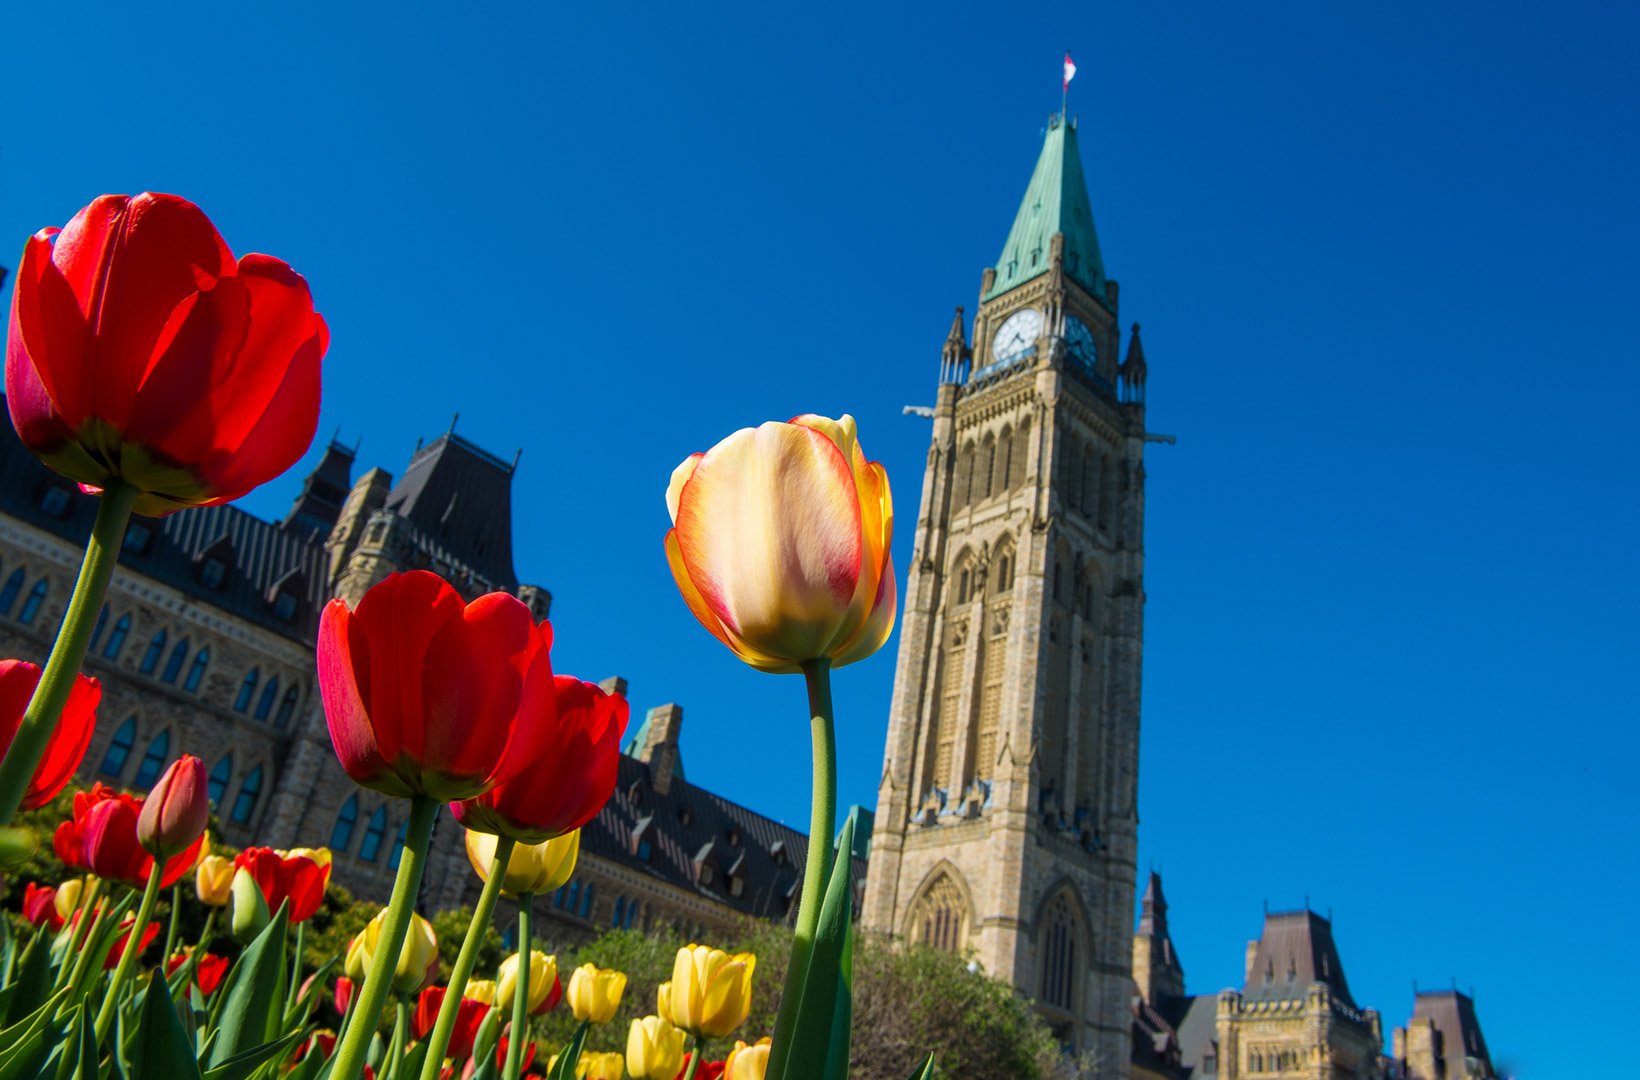 A view of the Ottawa Parliament building from below with red and yellow flowers in the foreground.